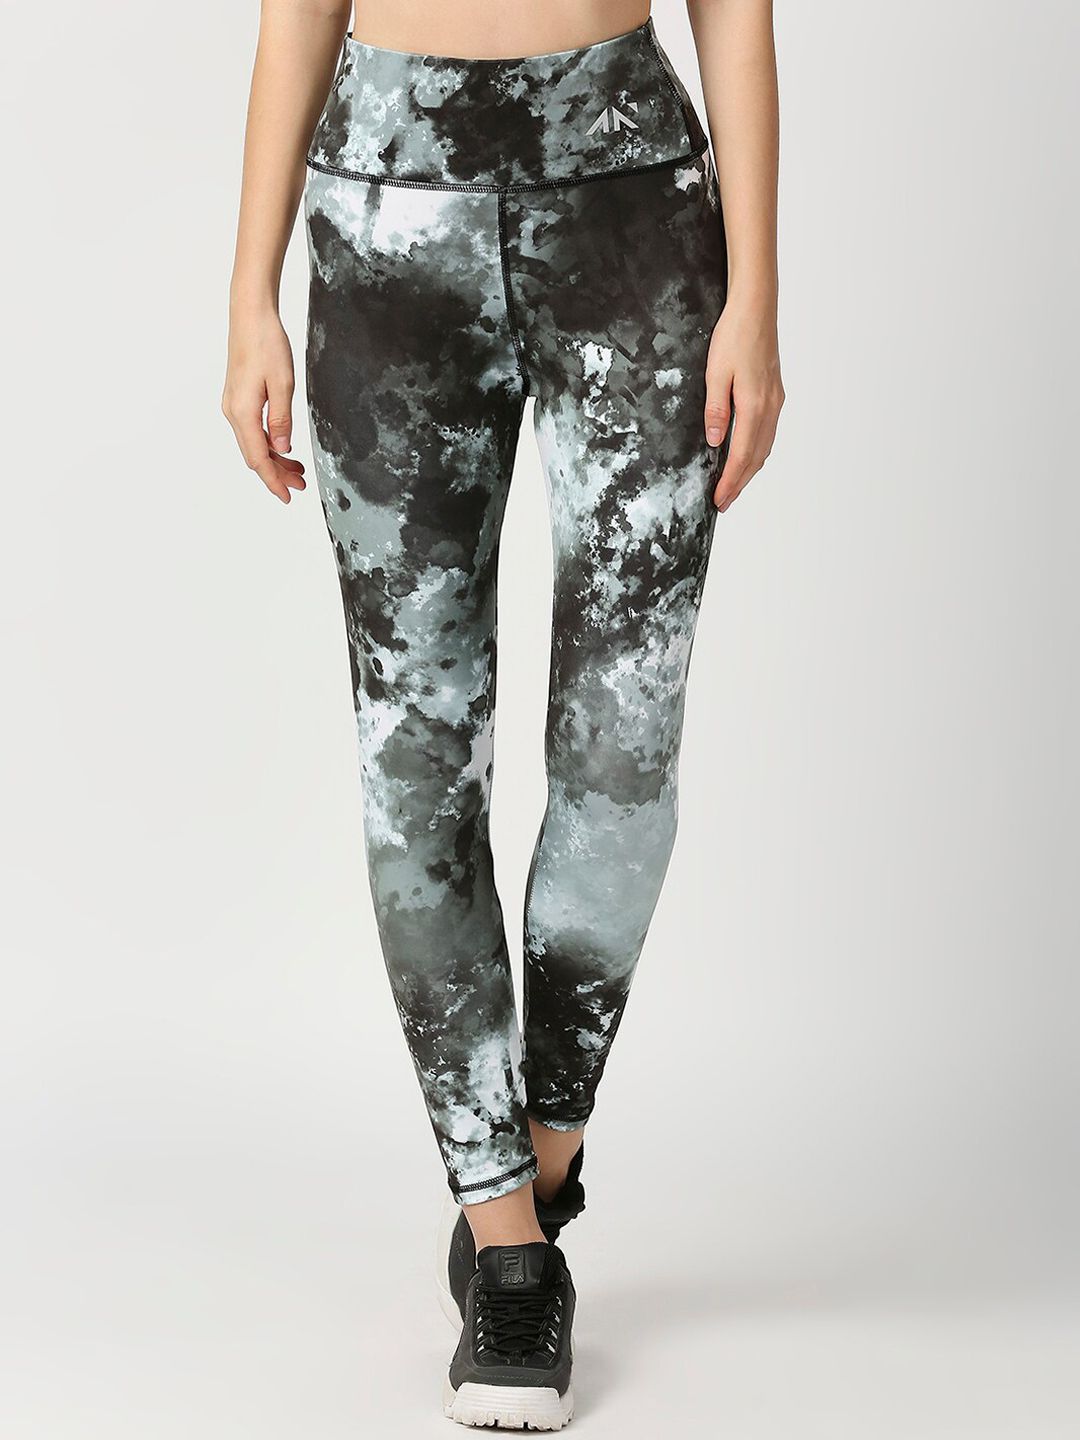 AESTHETIC NATION Women White & Black Printed Ankle-Length Tie Dye Tights Price in India